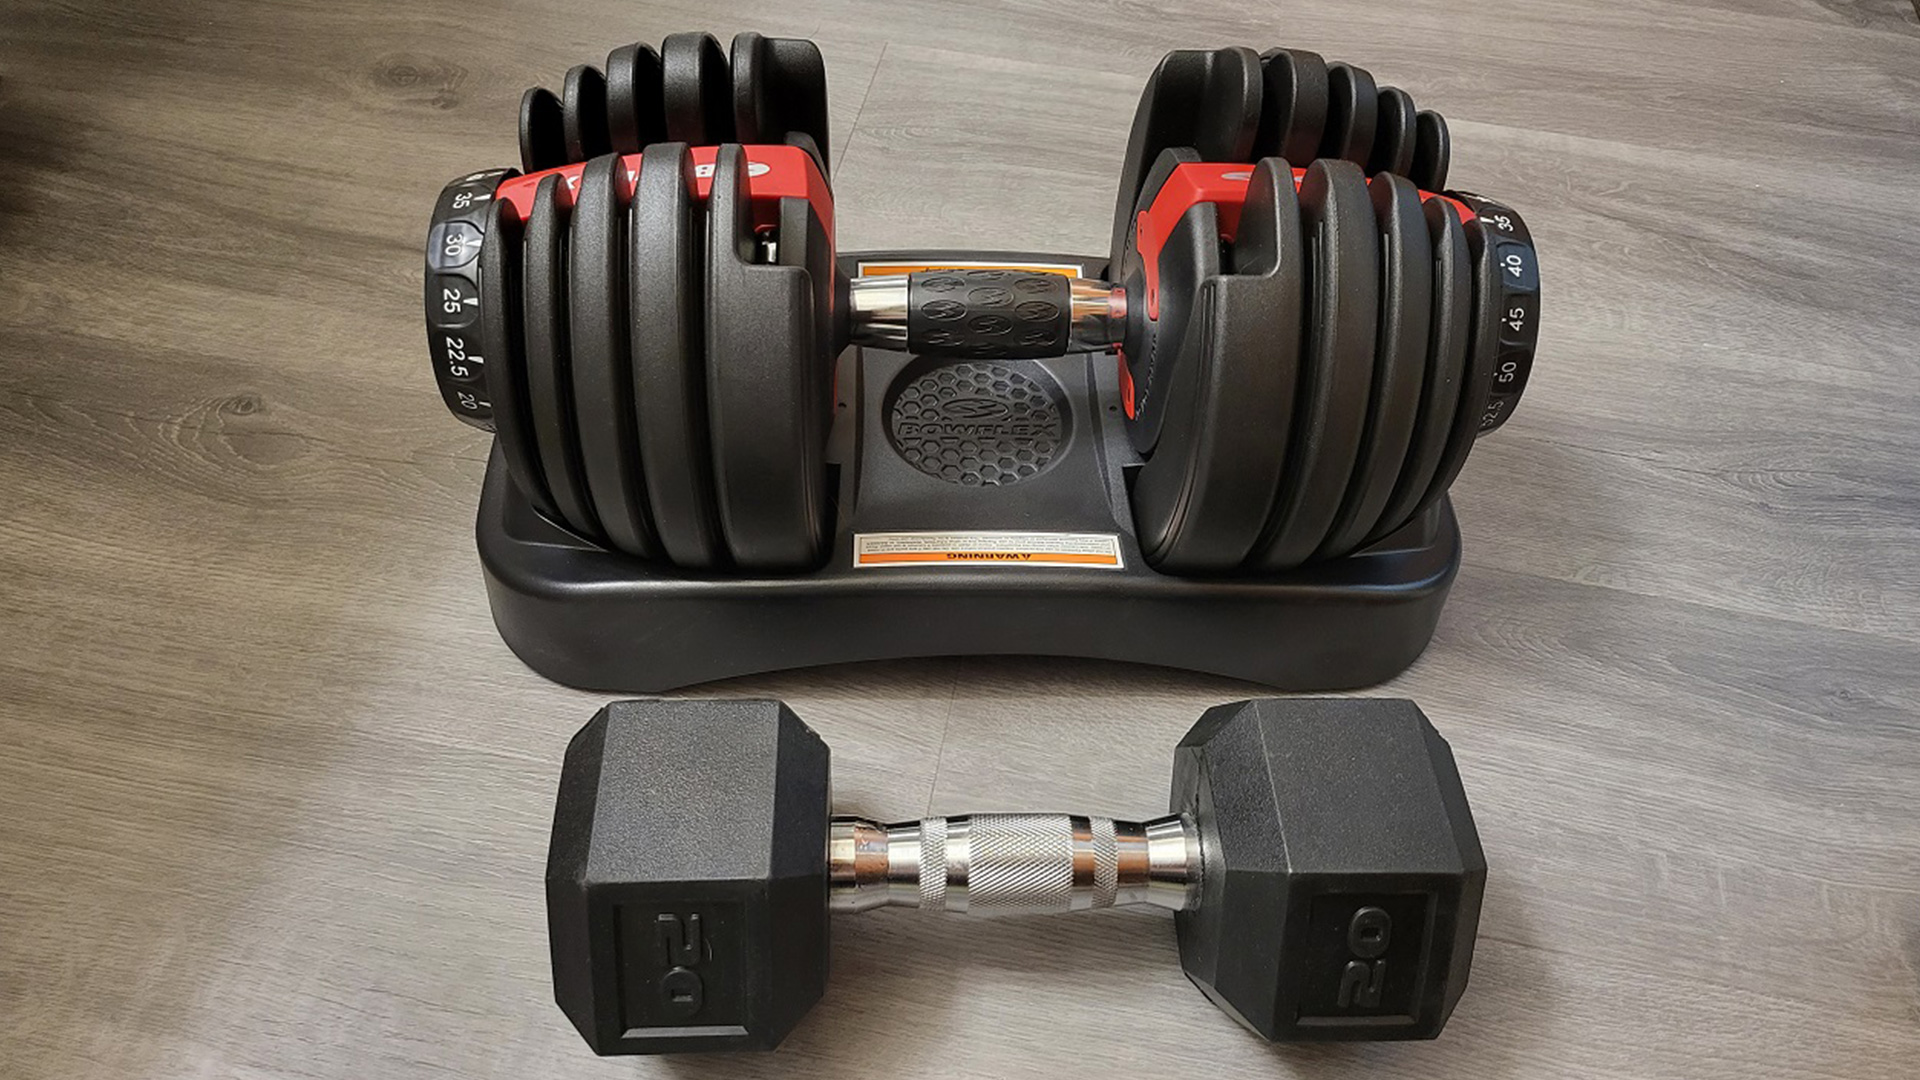 Bowflex 552 SelectTech Adjustable Dumbbells comparison to other weights